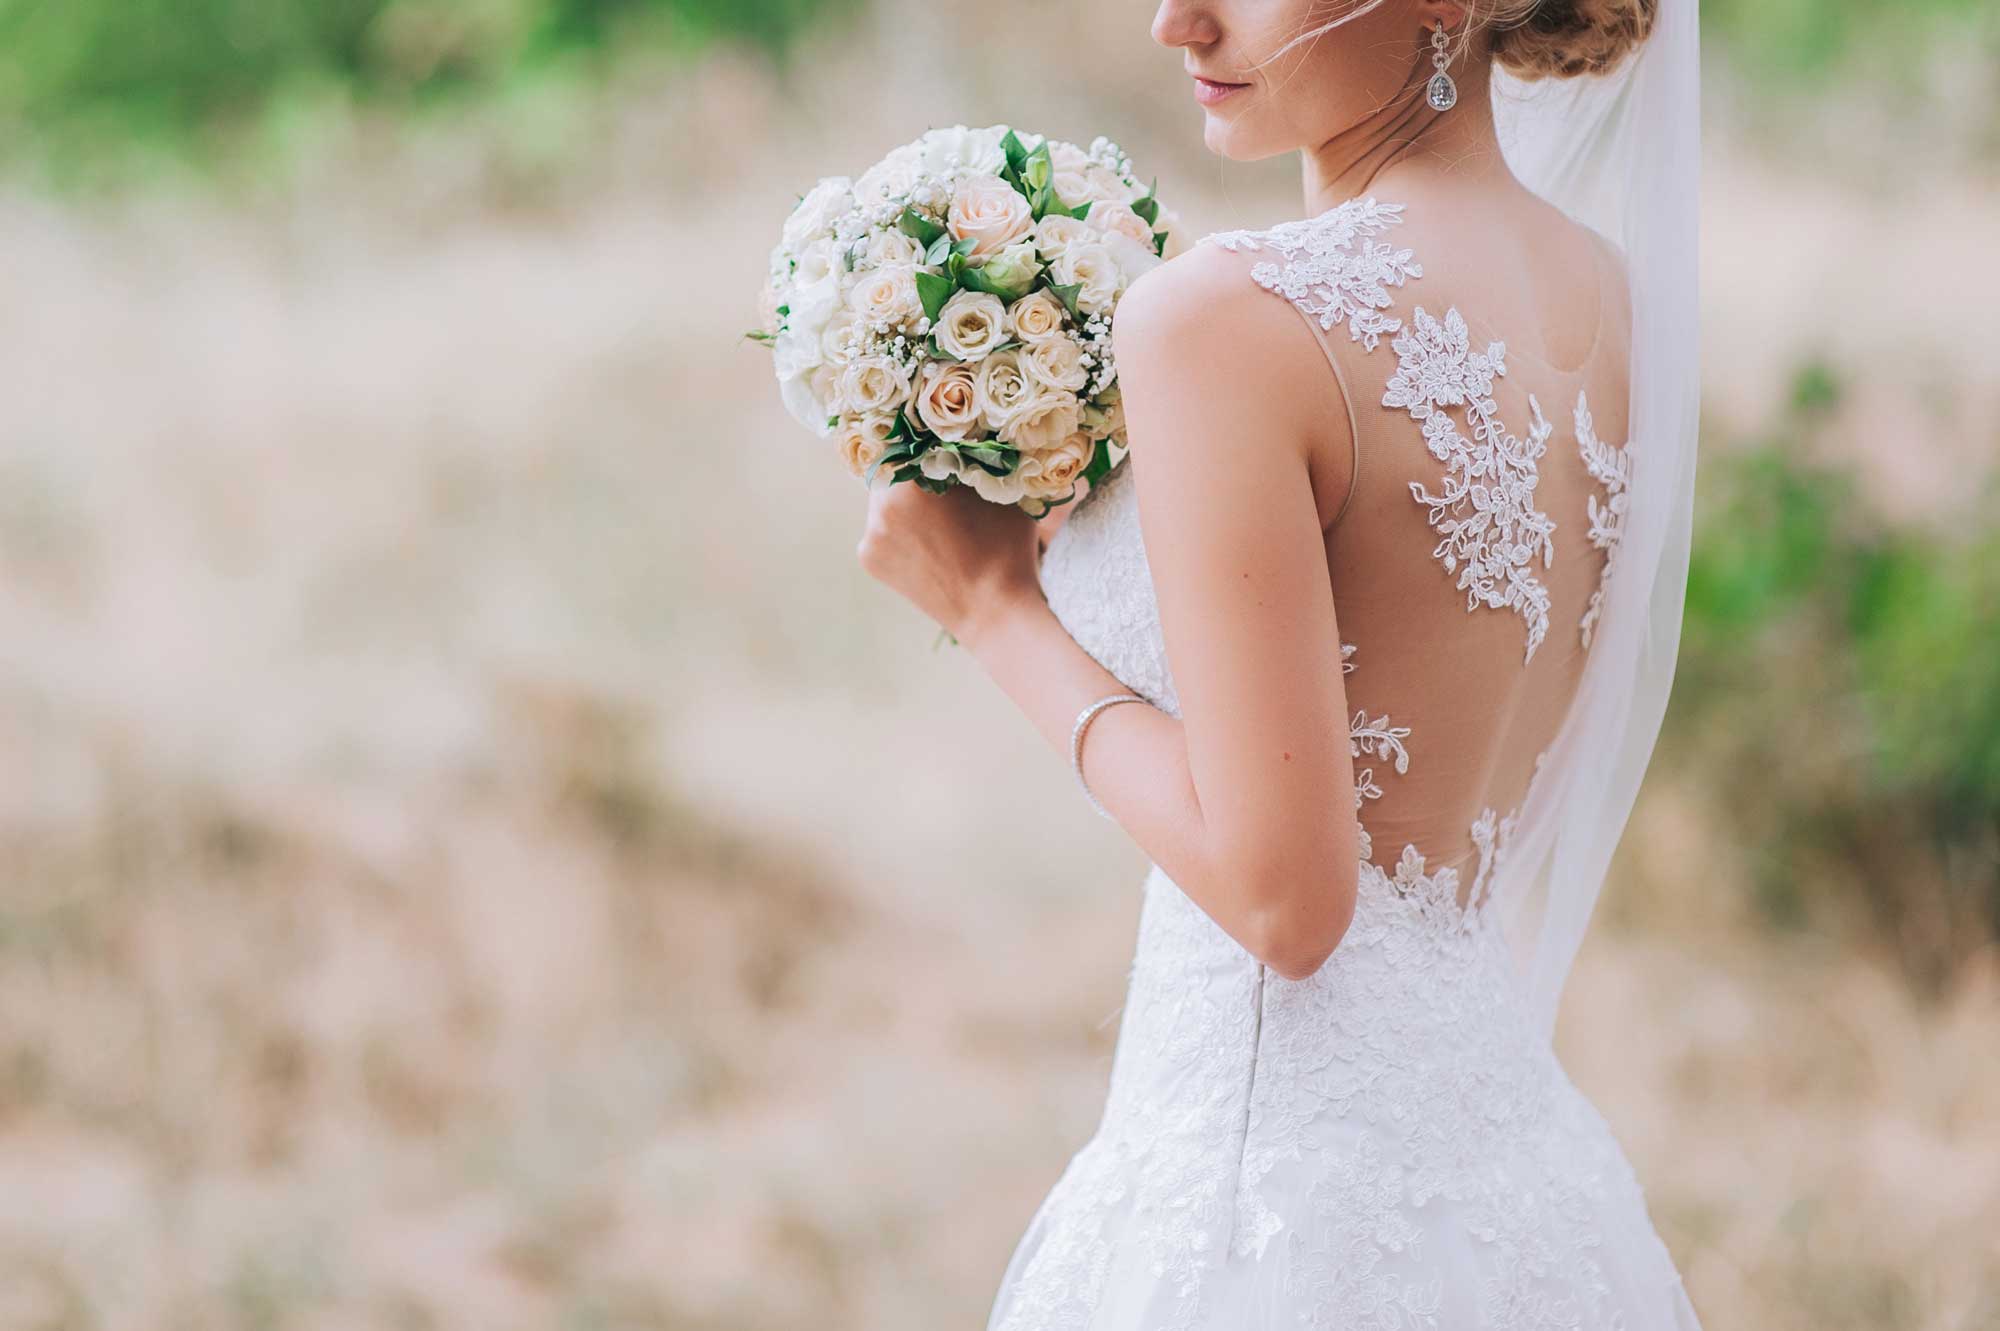 Bride in sleeveless wedding dress holding a white bouquet